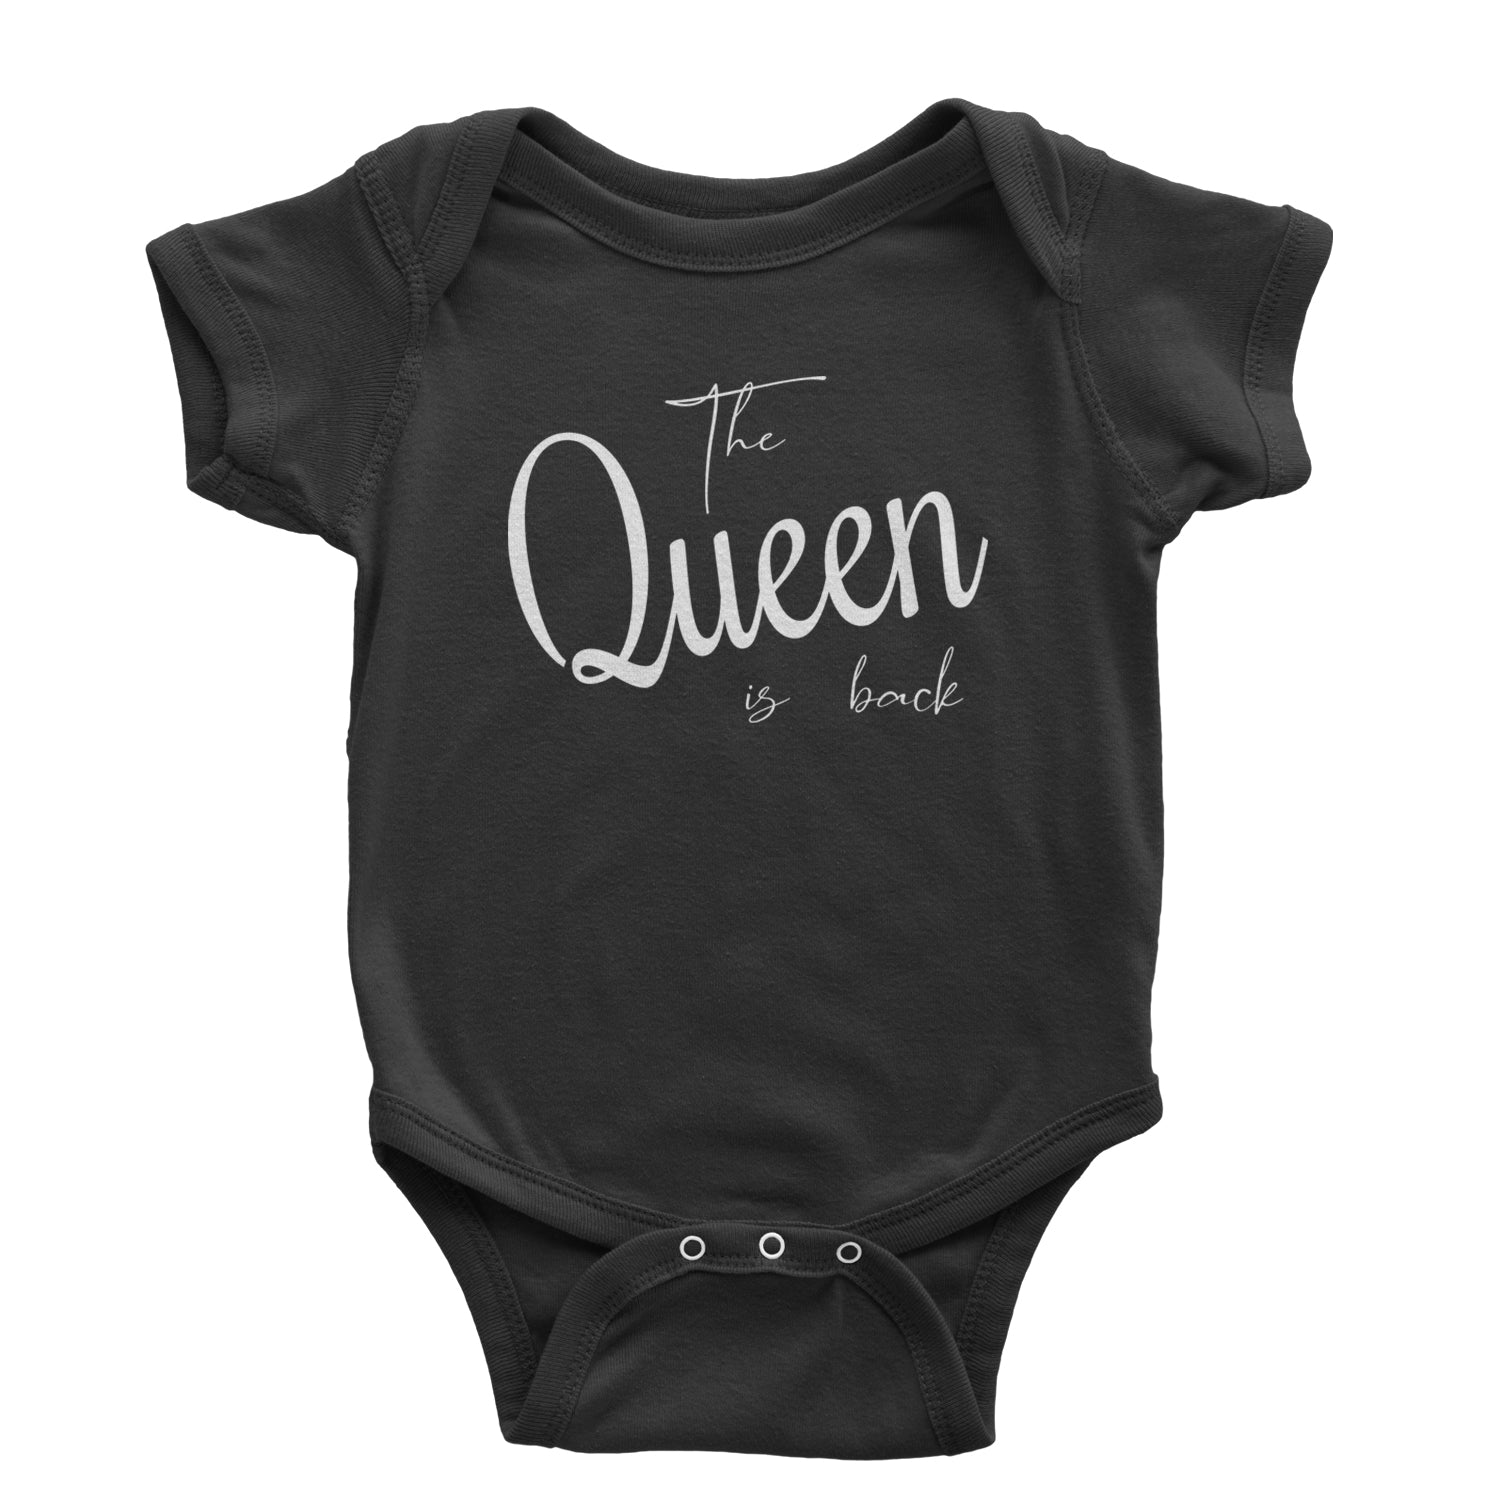 The Queen Is Back Celebration Infant One-Piece Romper Bodysuit and Toddler T-shirt